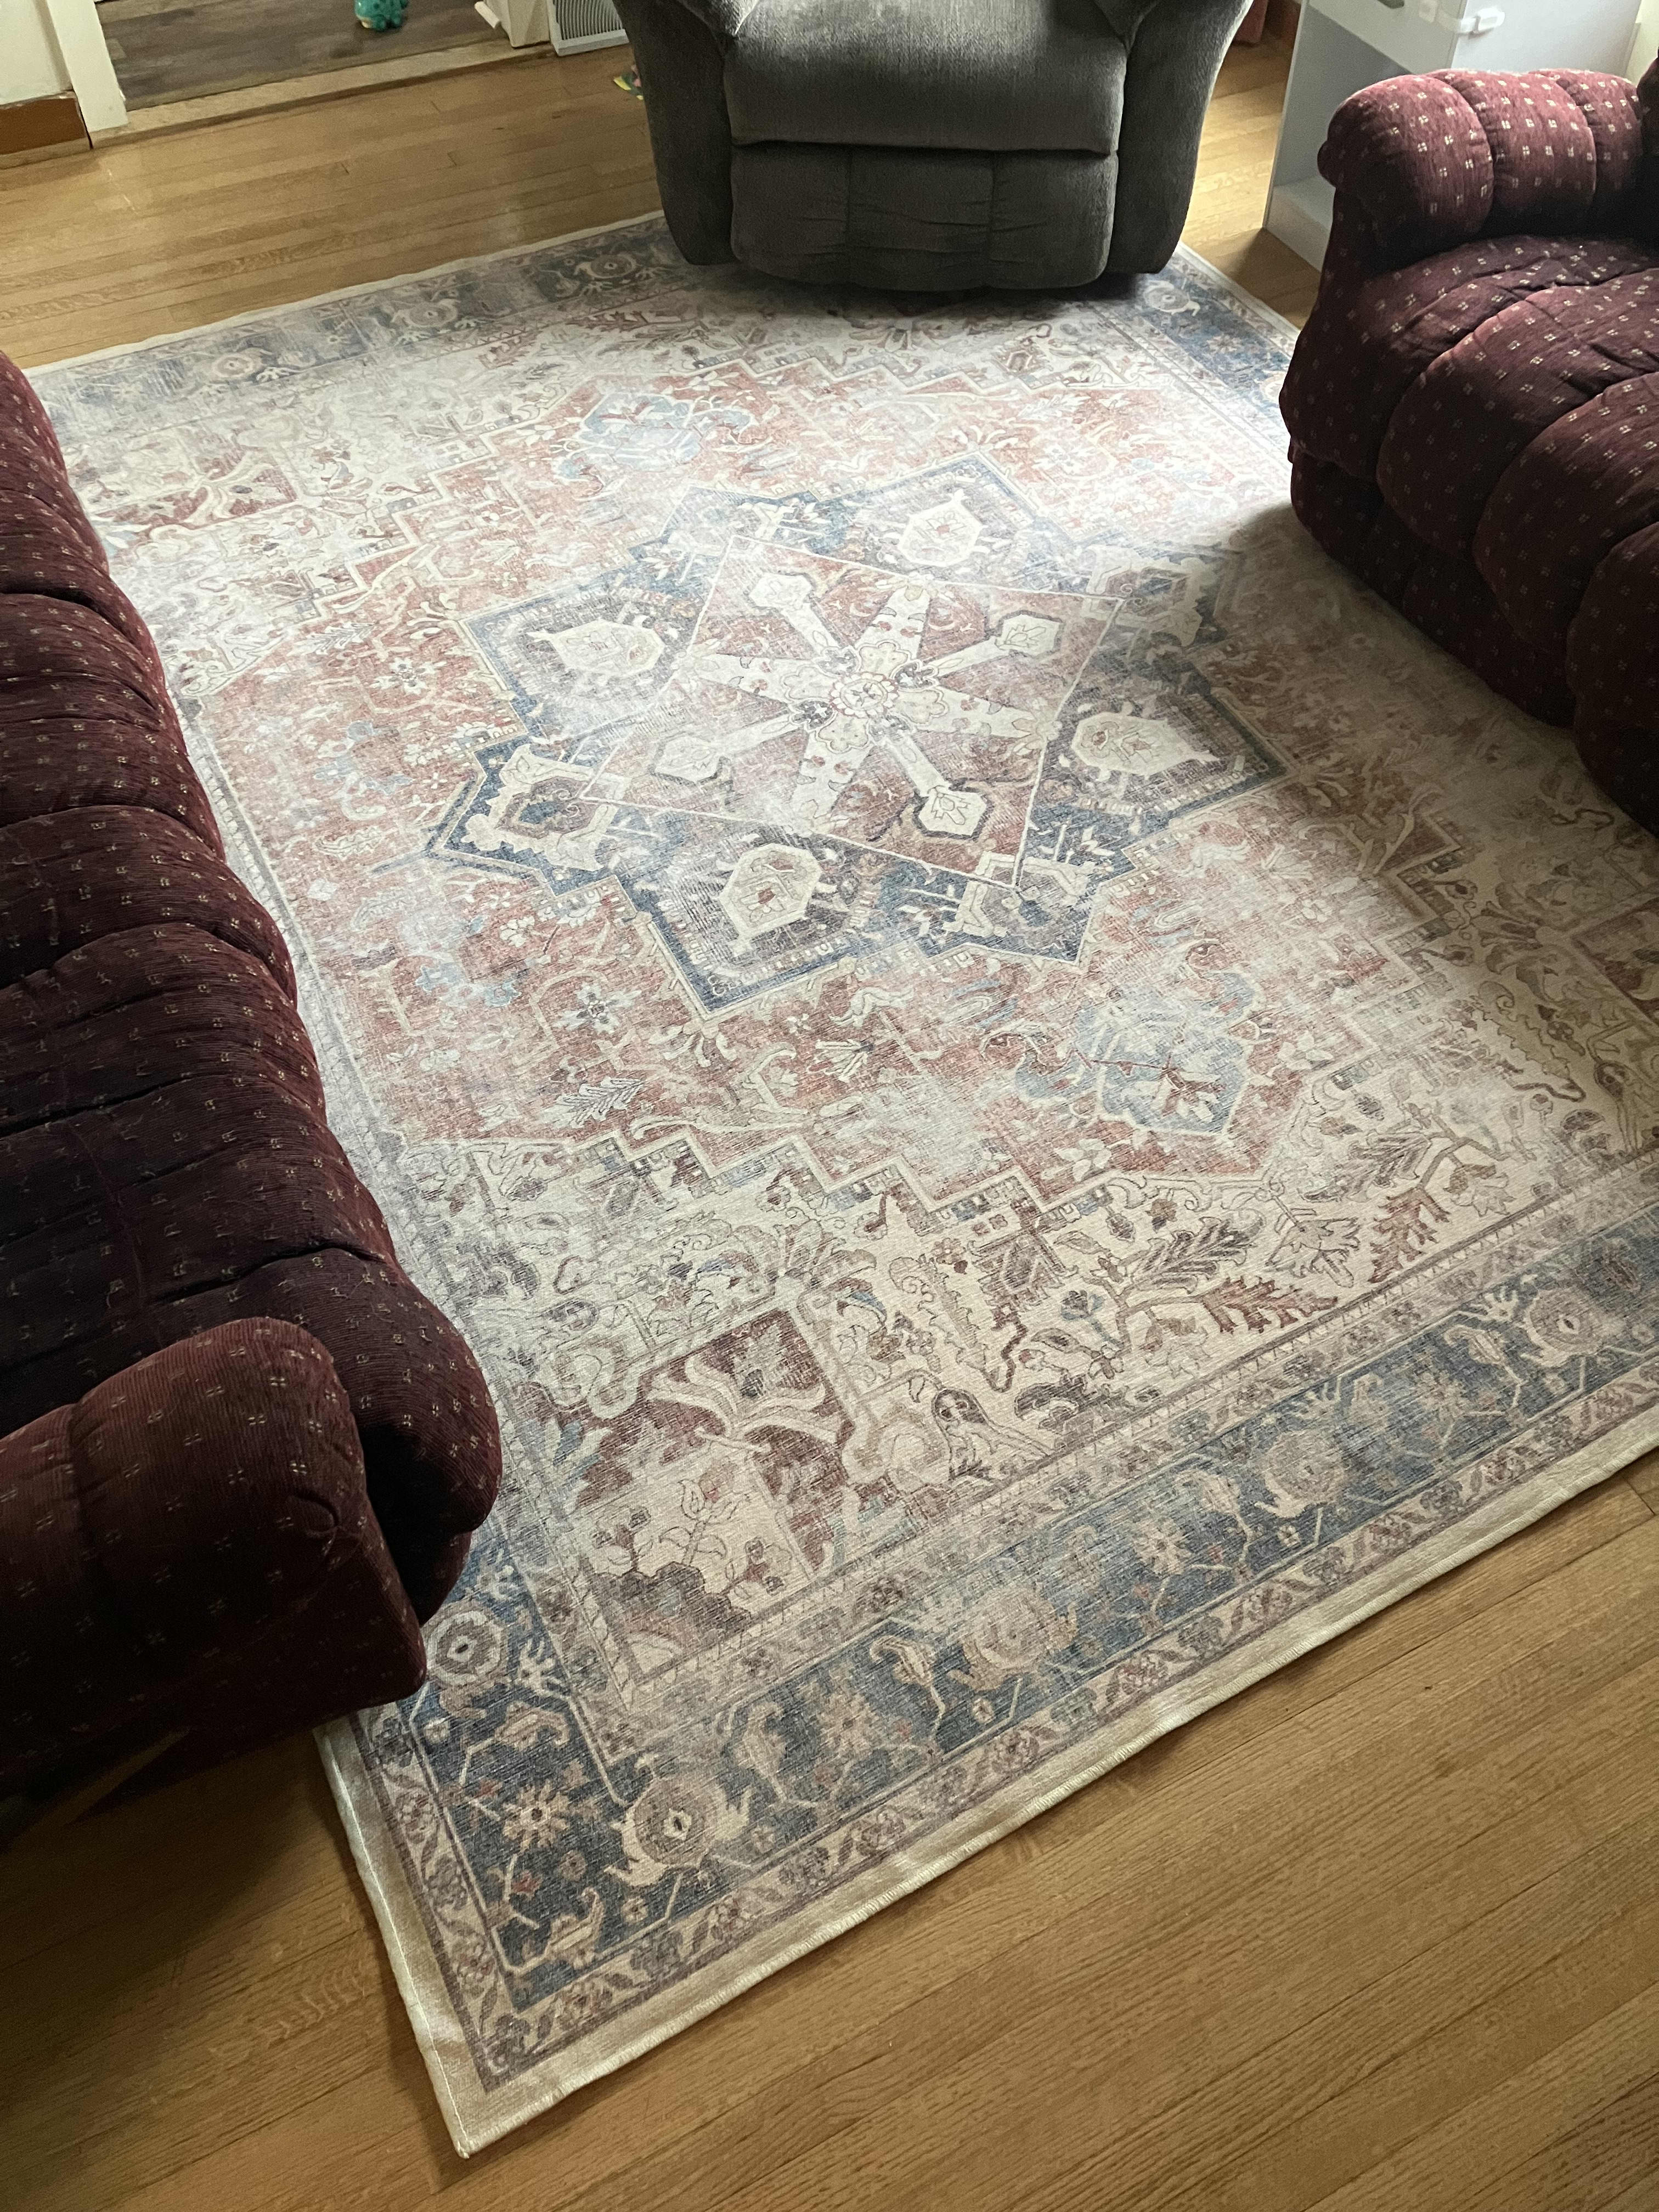 Is Ruggable Worth It? My Review After Buying 5 Washable Rugs - So